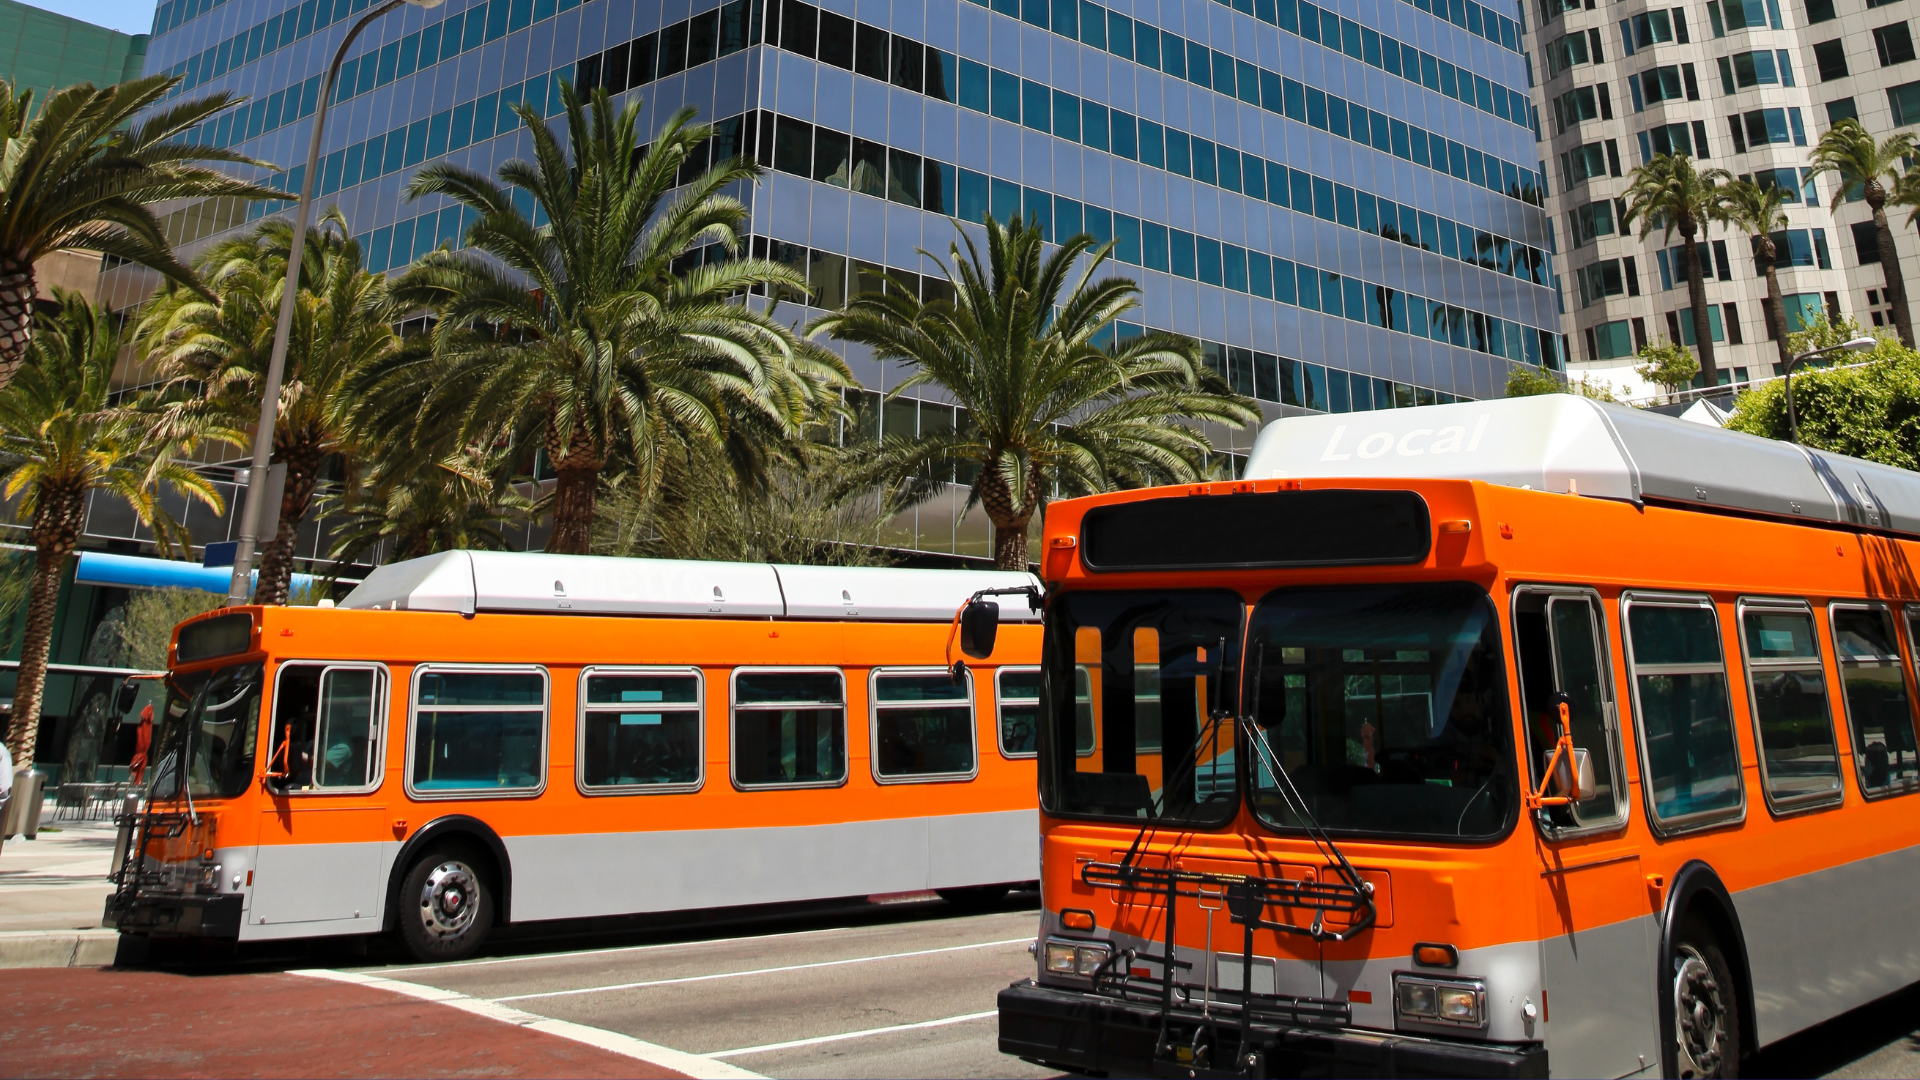 L.A. Metro buses in downtown Los Angeles. (Getty Images)